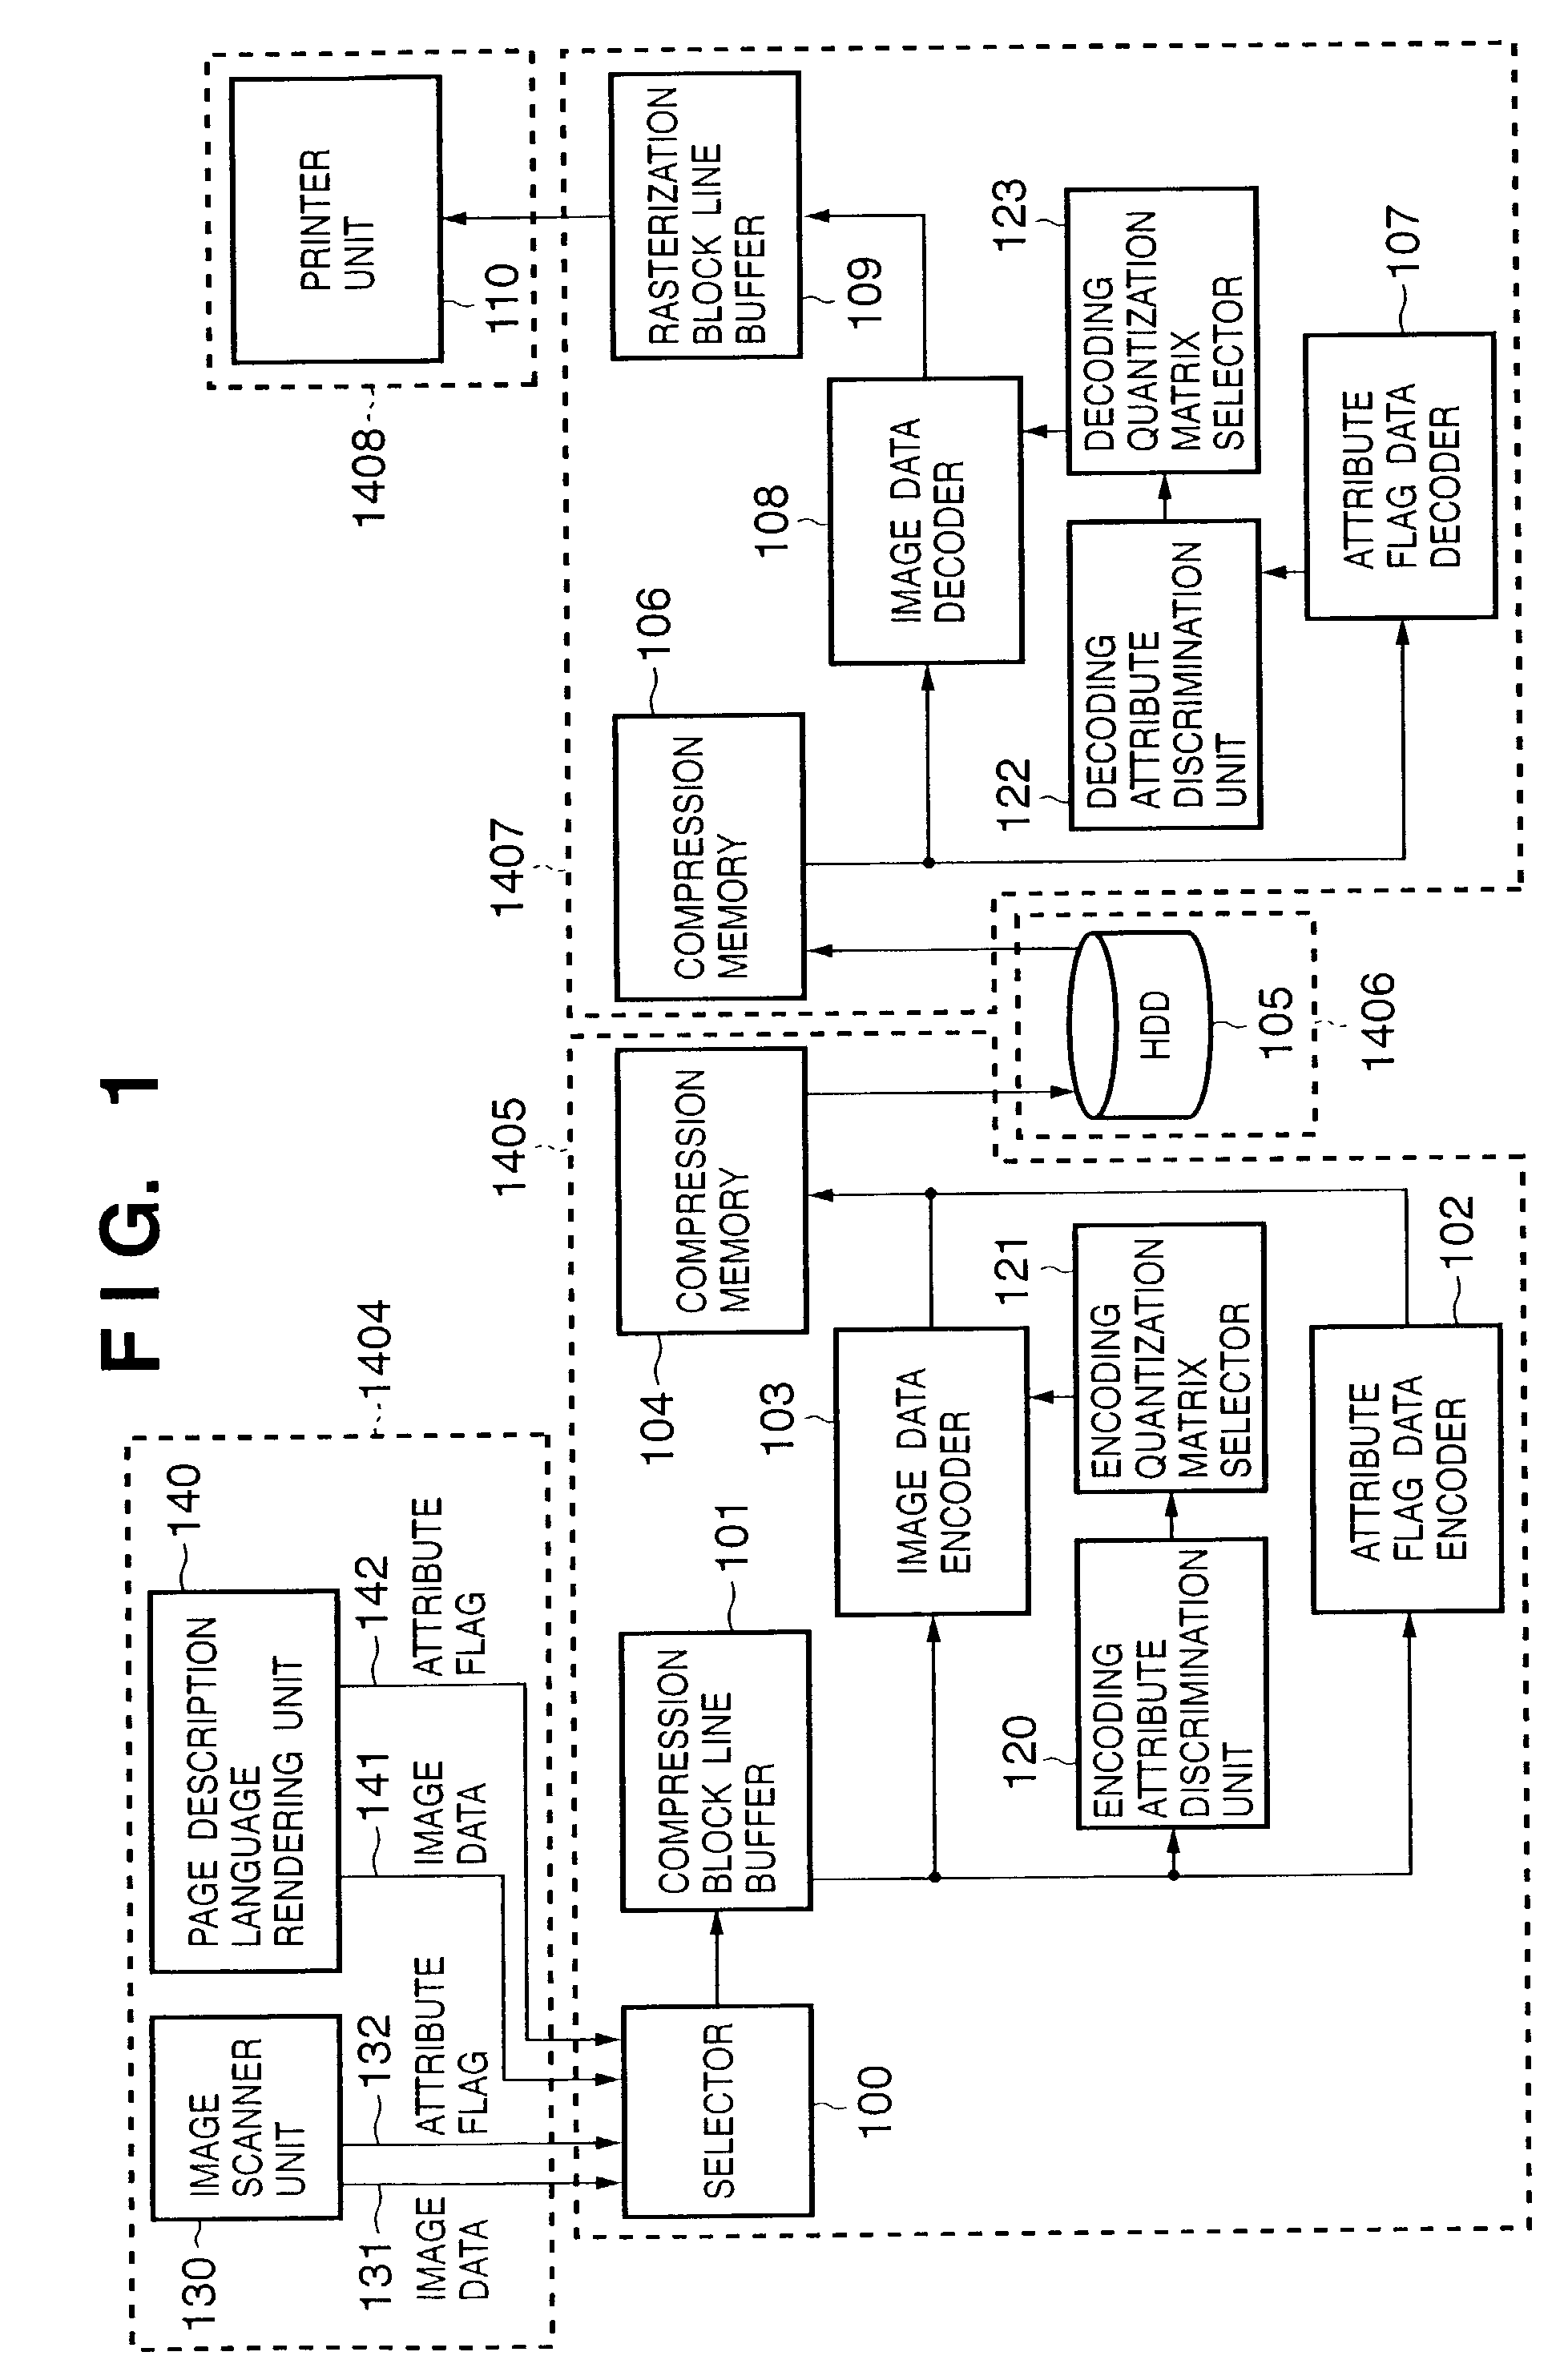 Image processing apparatus and method which compresses image data of each region using a selected encoding method